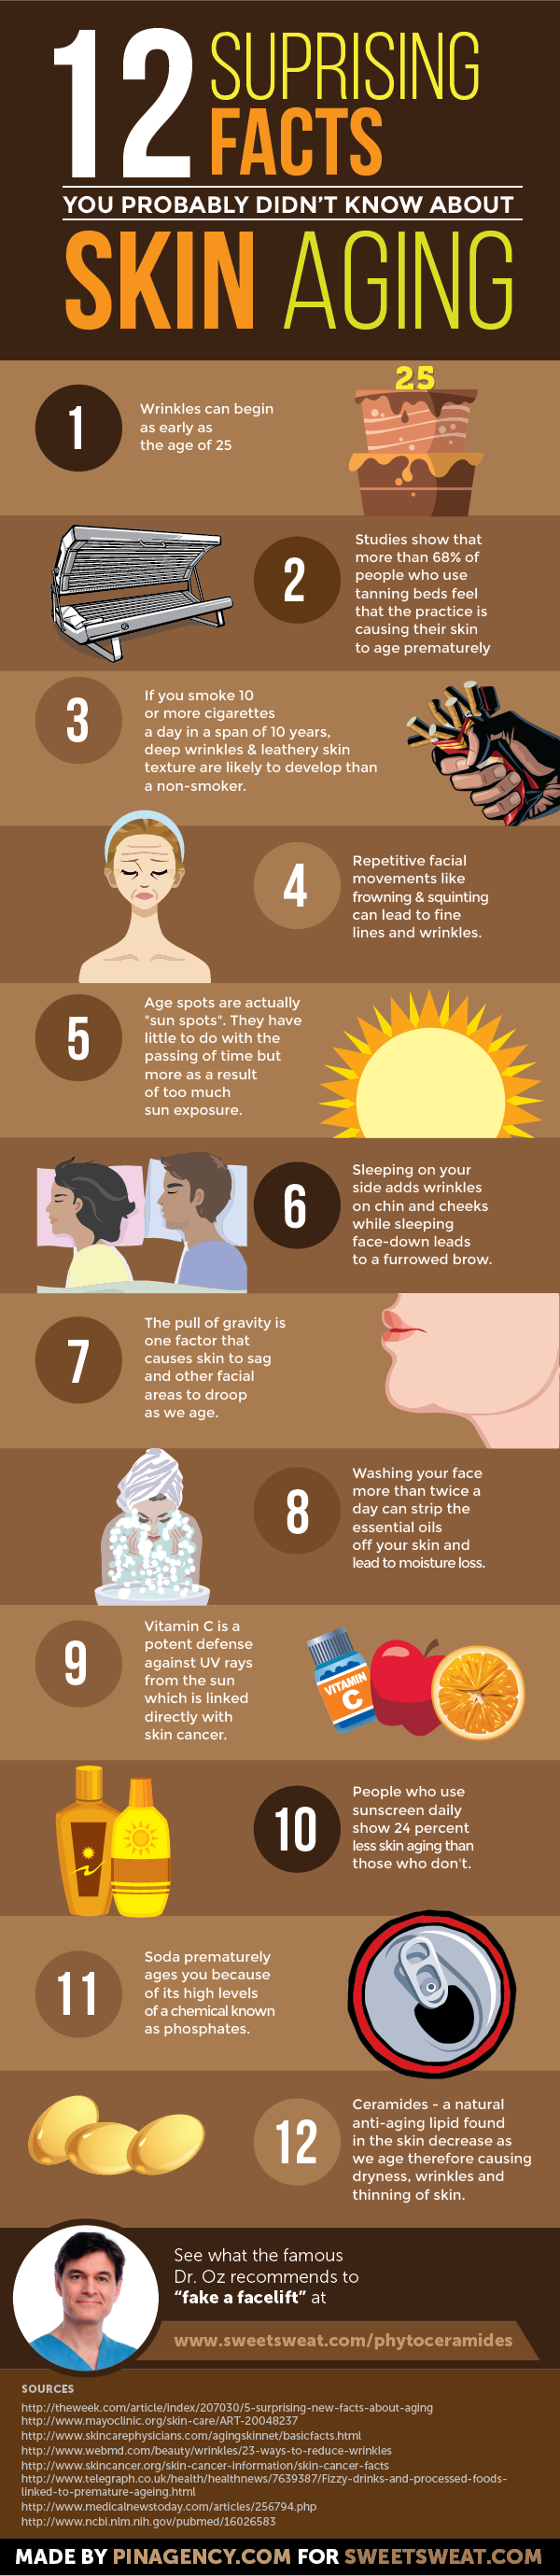 12 Surprising Facts About Skin Aging